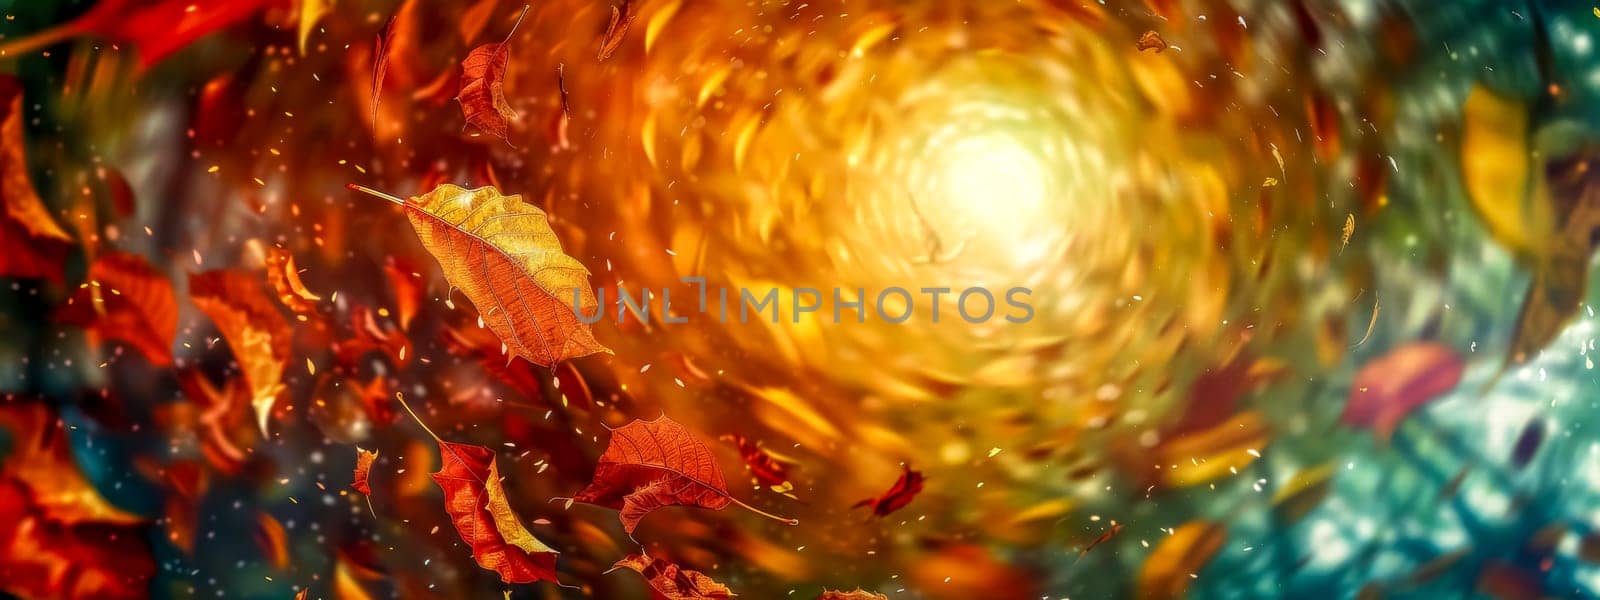 Dynamic and vibrant swirling autumn leaves background with colorful red. Orange. And yellow foliage. Creating a magical and artistic seasonal change in nature. Perfect for abstract design. Wallpaper